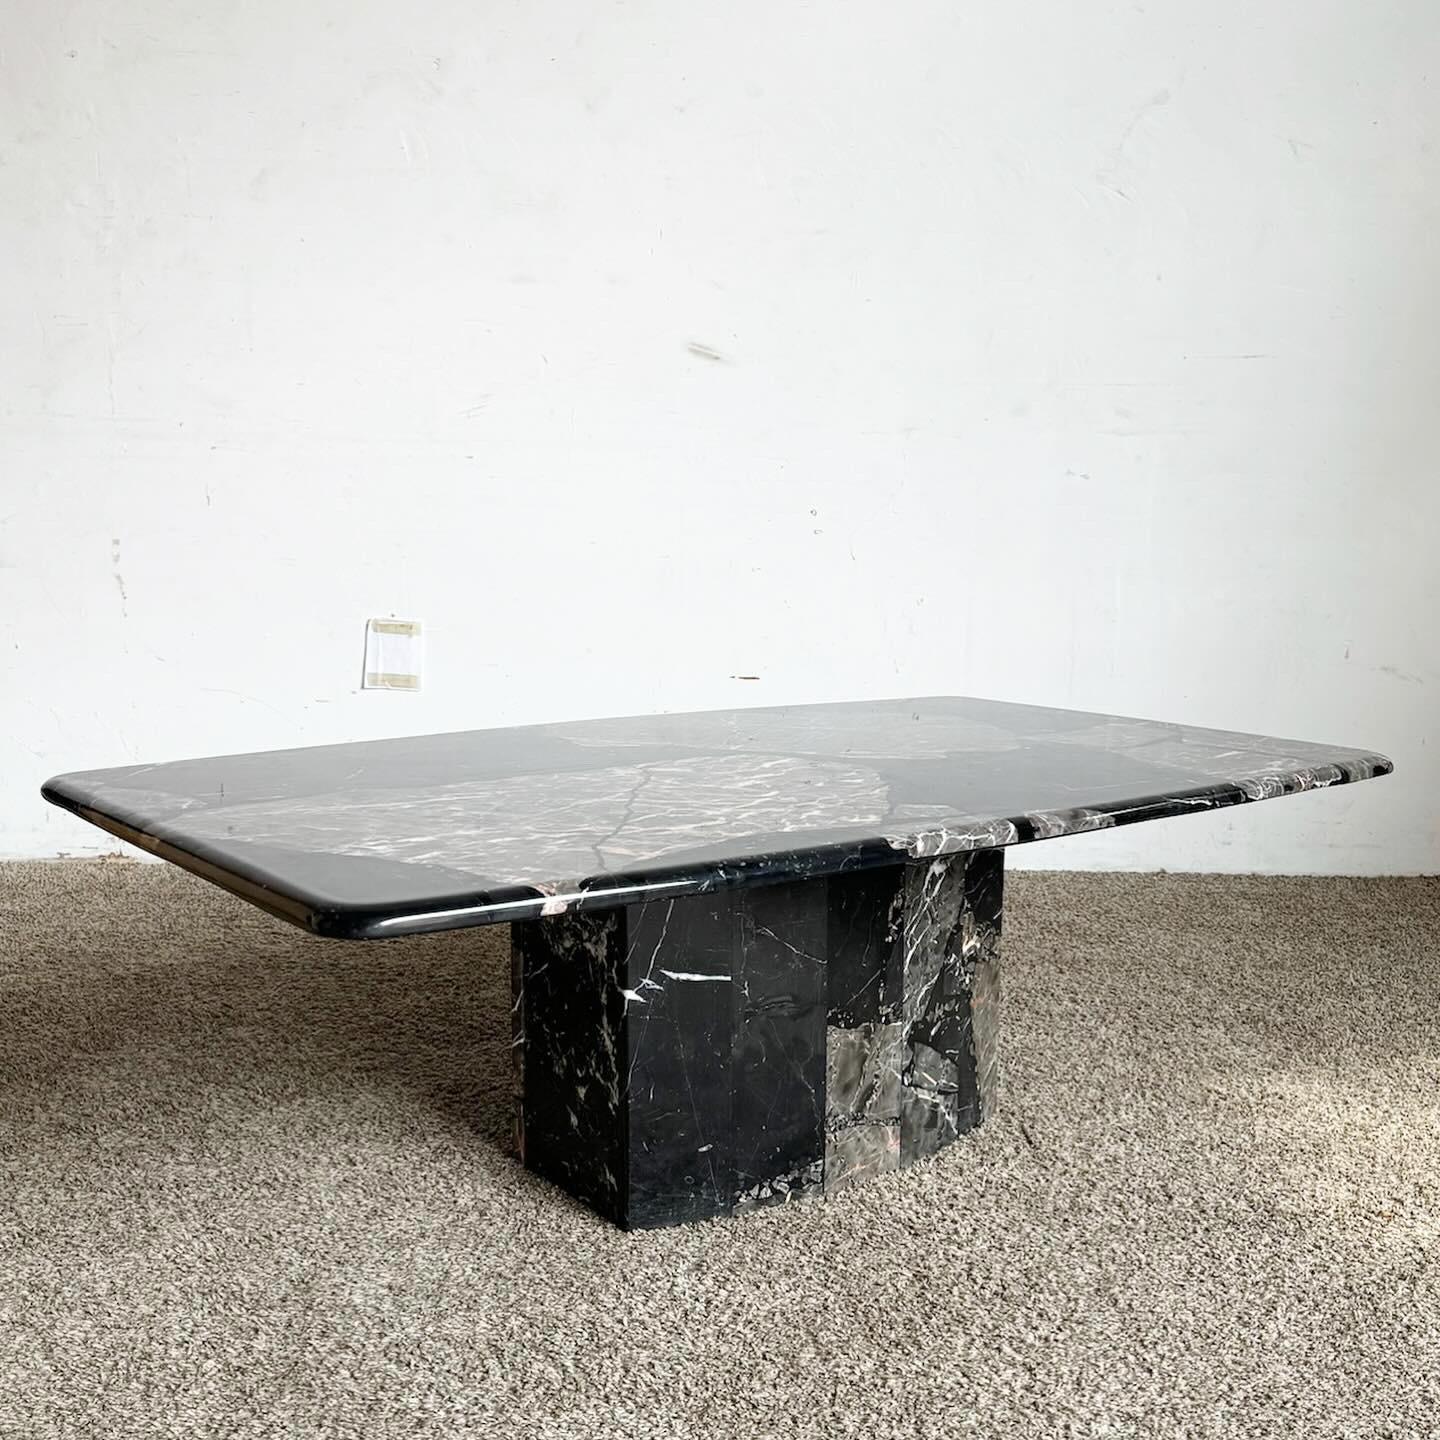 The Postmodern Black Marble Coffee Table on a scalloped pedestal base is a dramatic addition to any living space. With its luxurious black marble top and unique scalloped pedestal, it embodies postmodern elegance. The contrast of sleek marble and